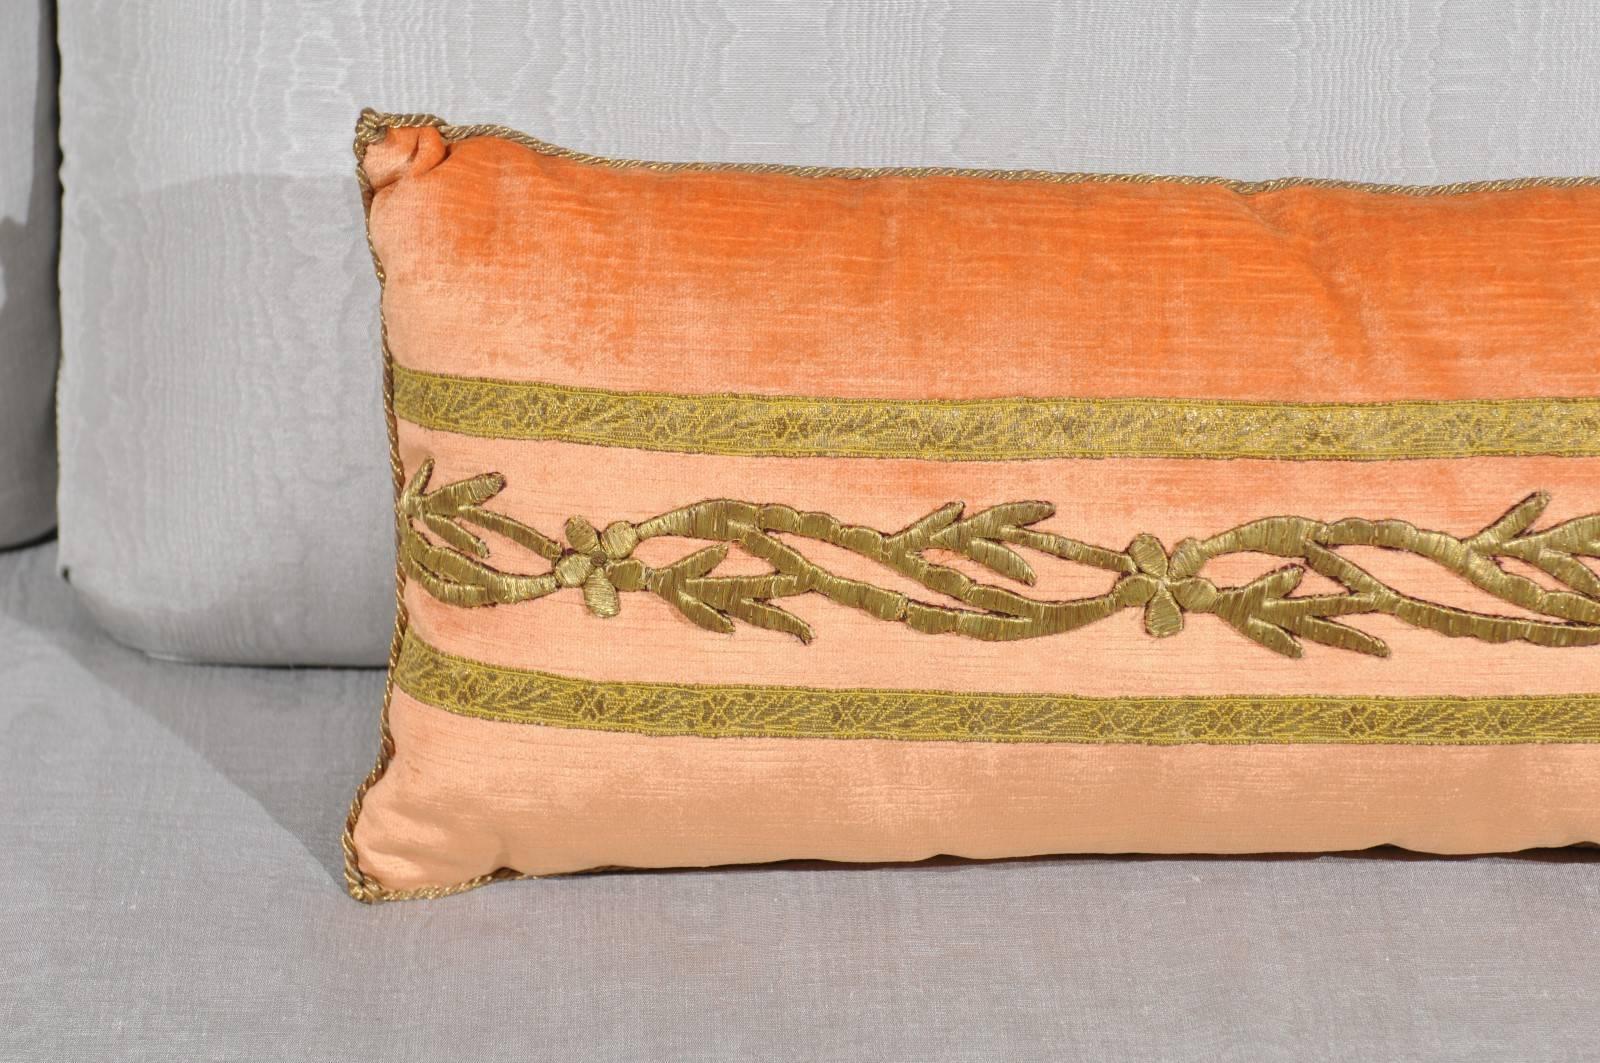 A long pillow made from an antique Ottoman Empire raised gold metallic embroidery on melon velvet. The pillow is adorned with a gold metallic vining embroidery and bordered with antique gold metallic galon. Hand trimmed with vintage fold metallic